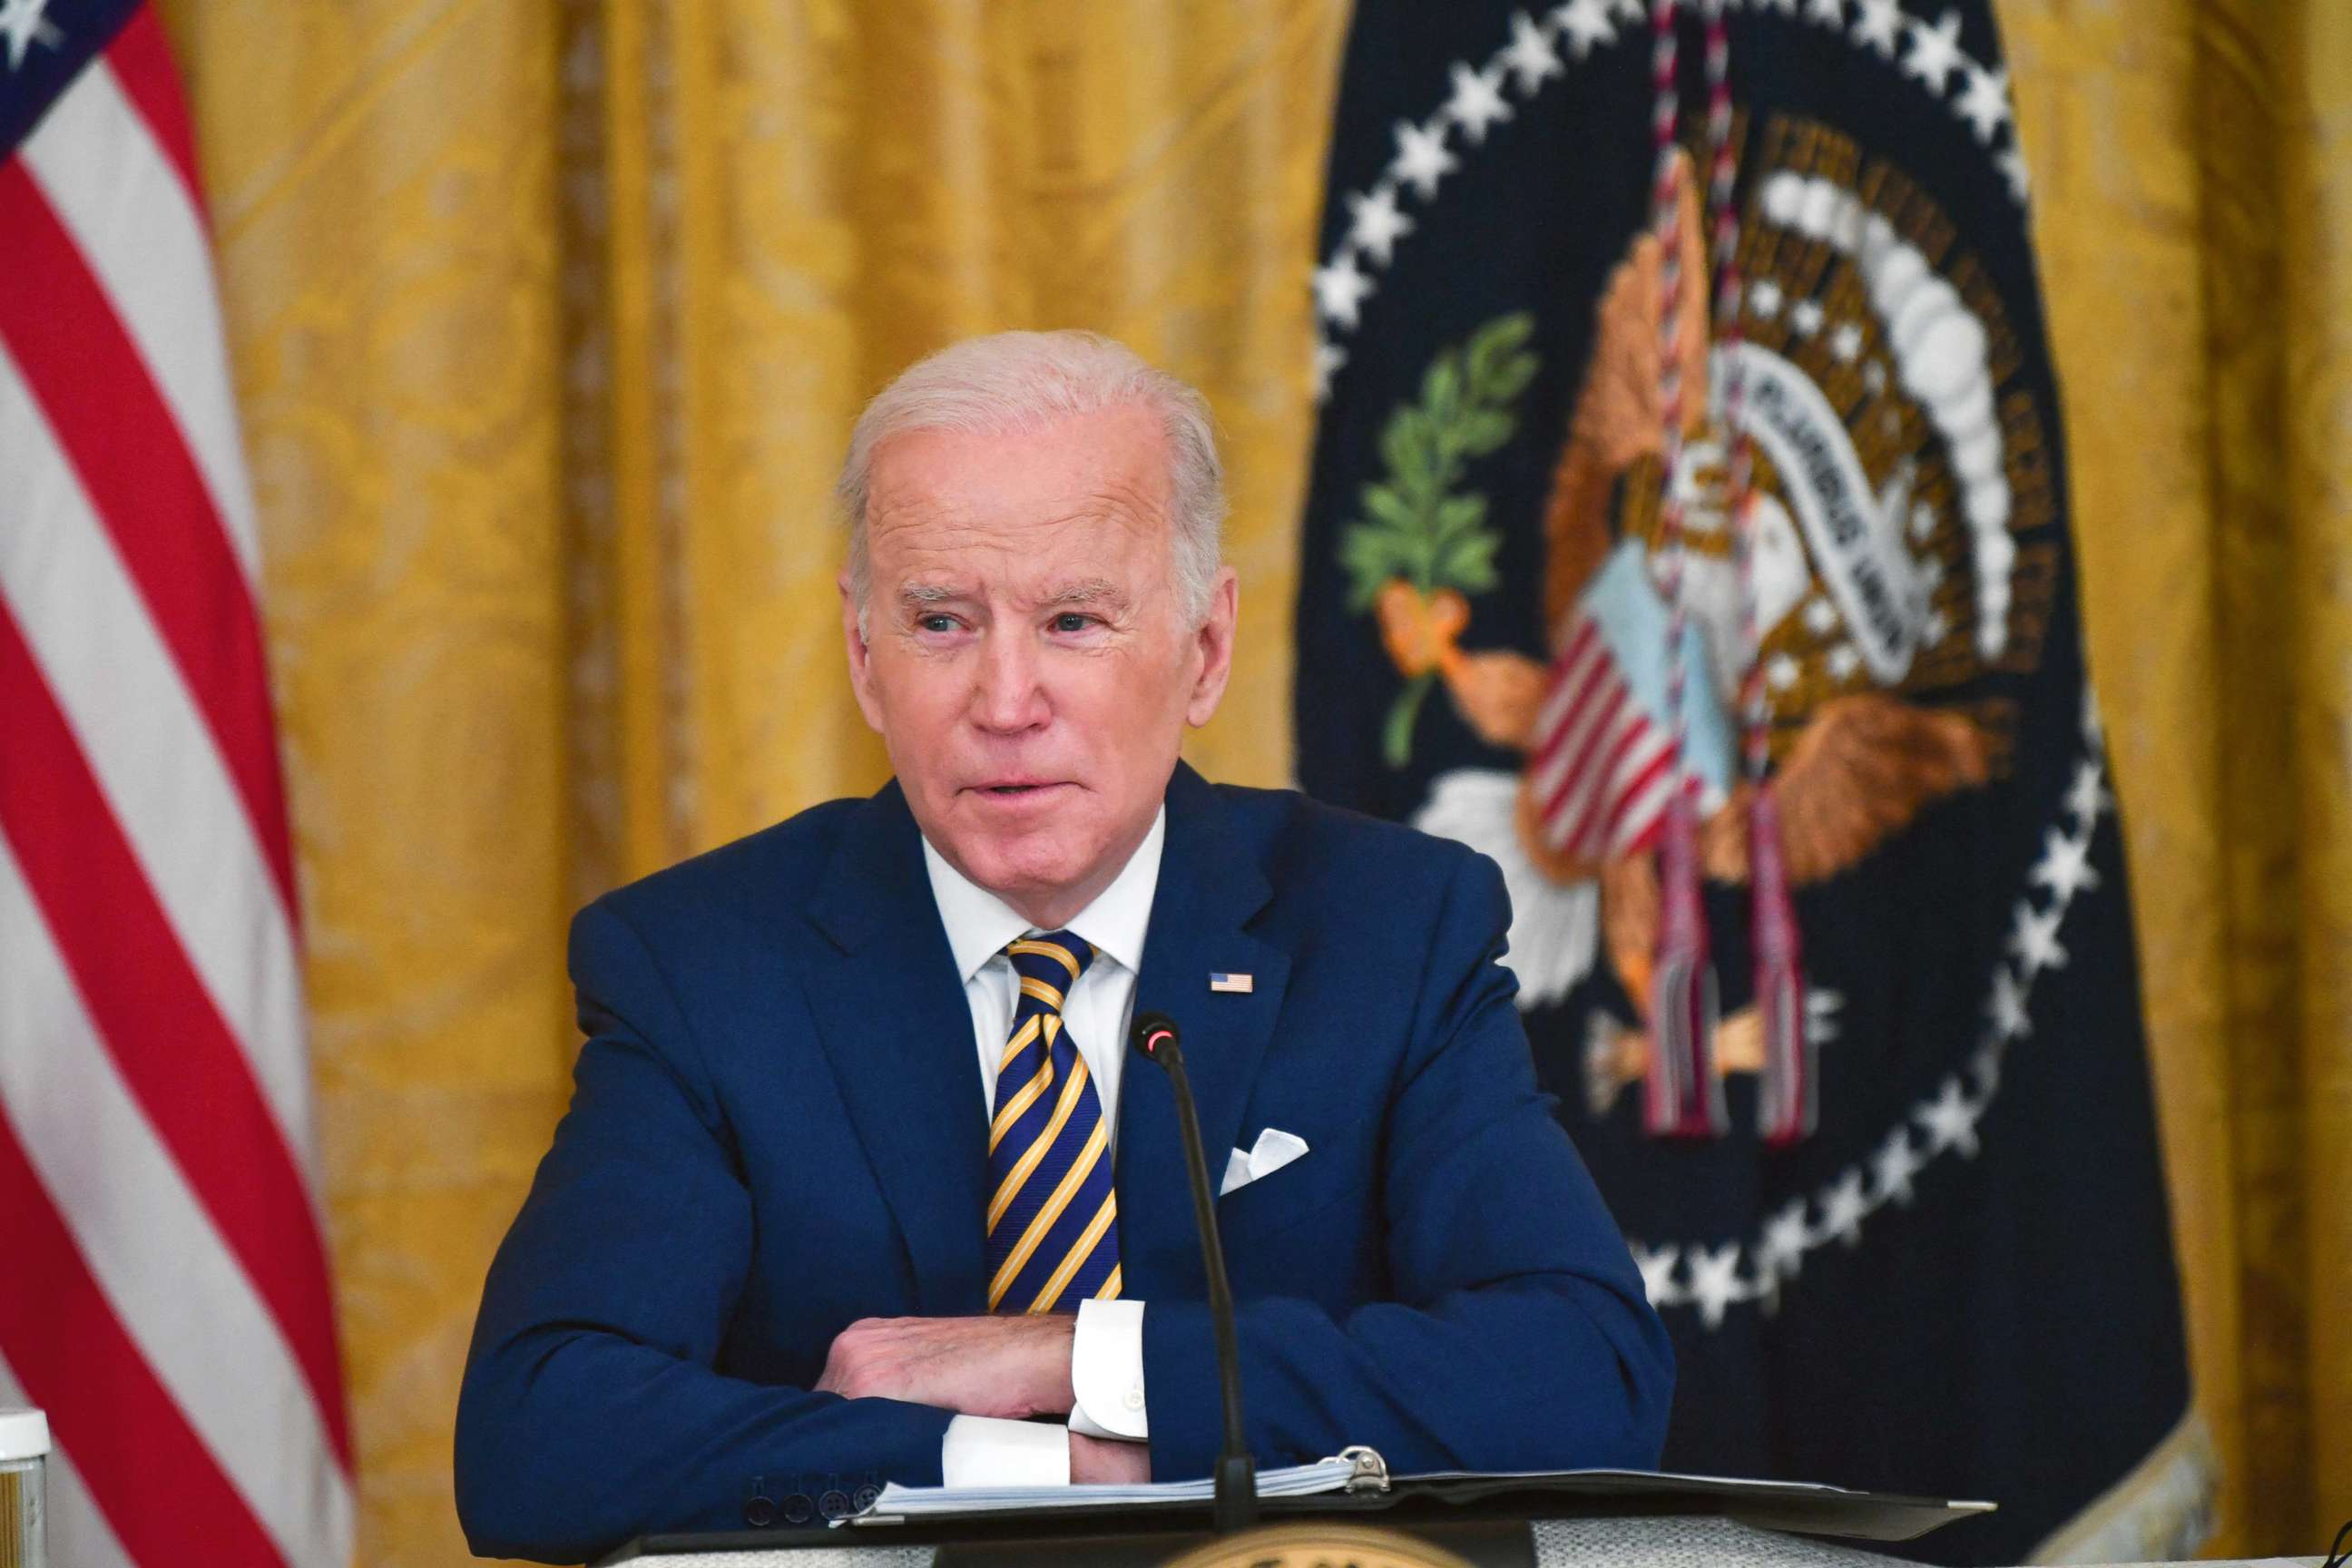 PHOTO: President Joe Biden speaks during a meeting with the National Governors Association at the White House in Washington, D.C., on Jan. 31, 2022.